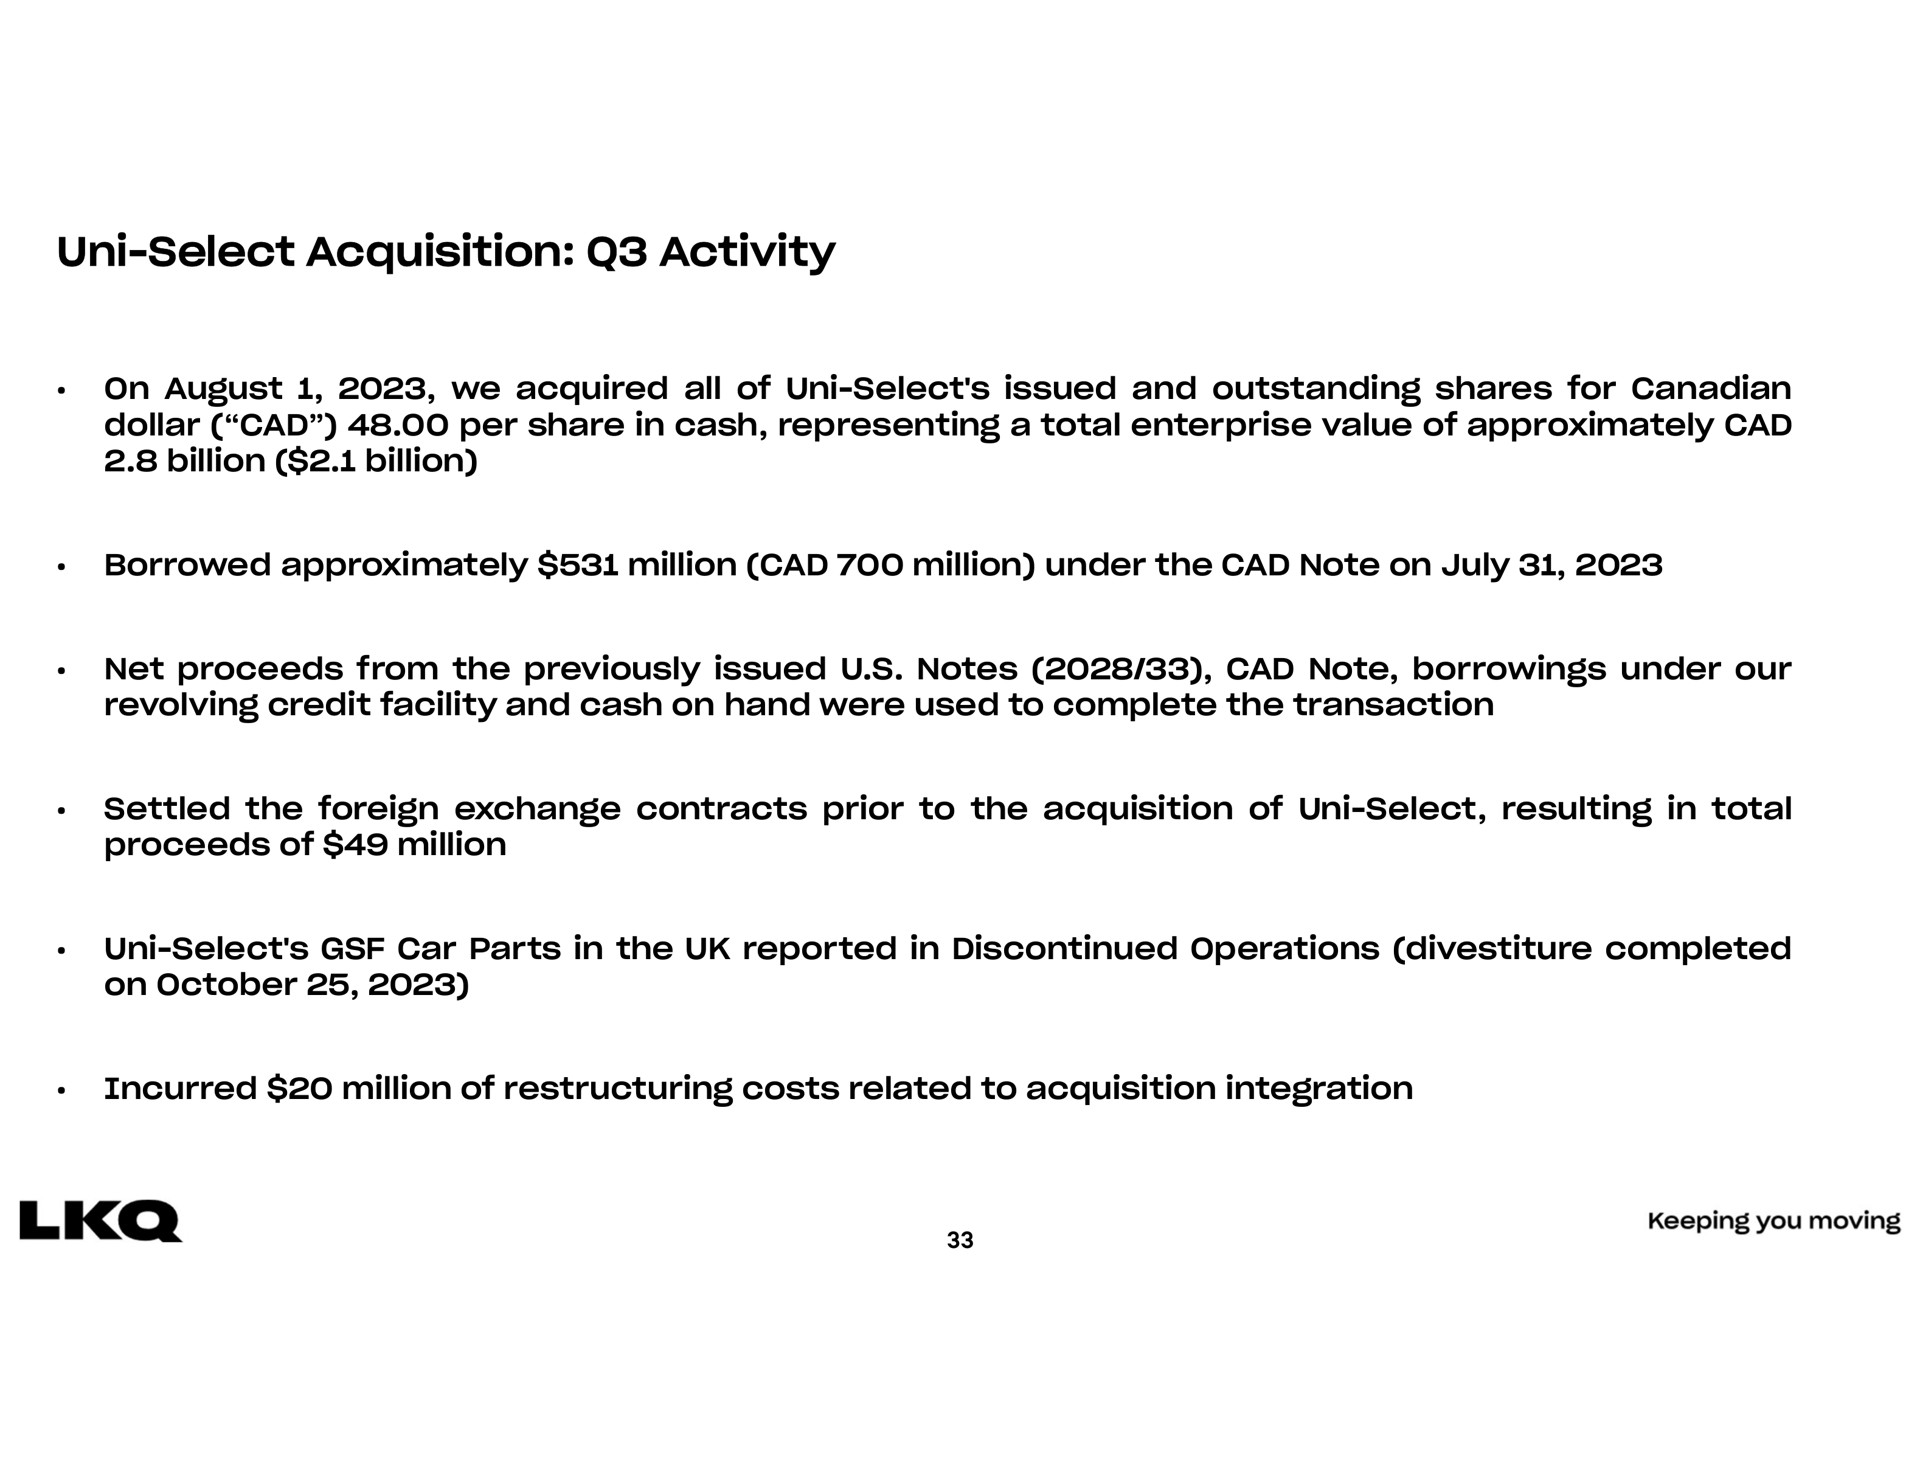 select acquisition activity on august we acquired all of issued and outstanding shares for net proceeds from the previously issued notes cad note borrowings under our revolving credit facility and cash on hand were used to complete the transaction settled the foreign exchange contracts prior to the of resulting in total incurred million of costs related to integration | LKQ